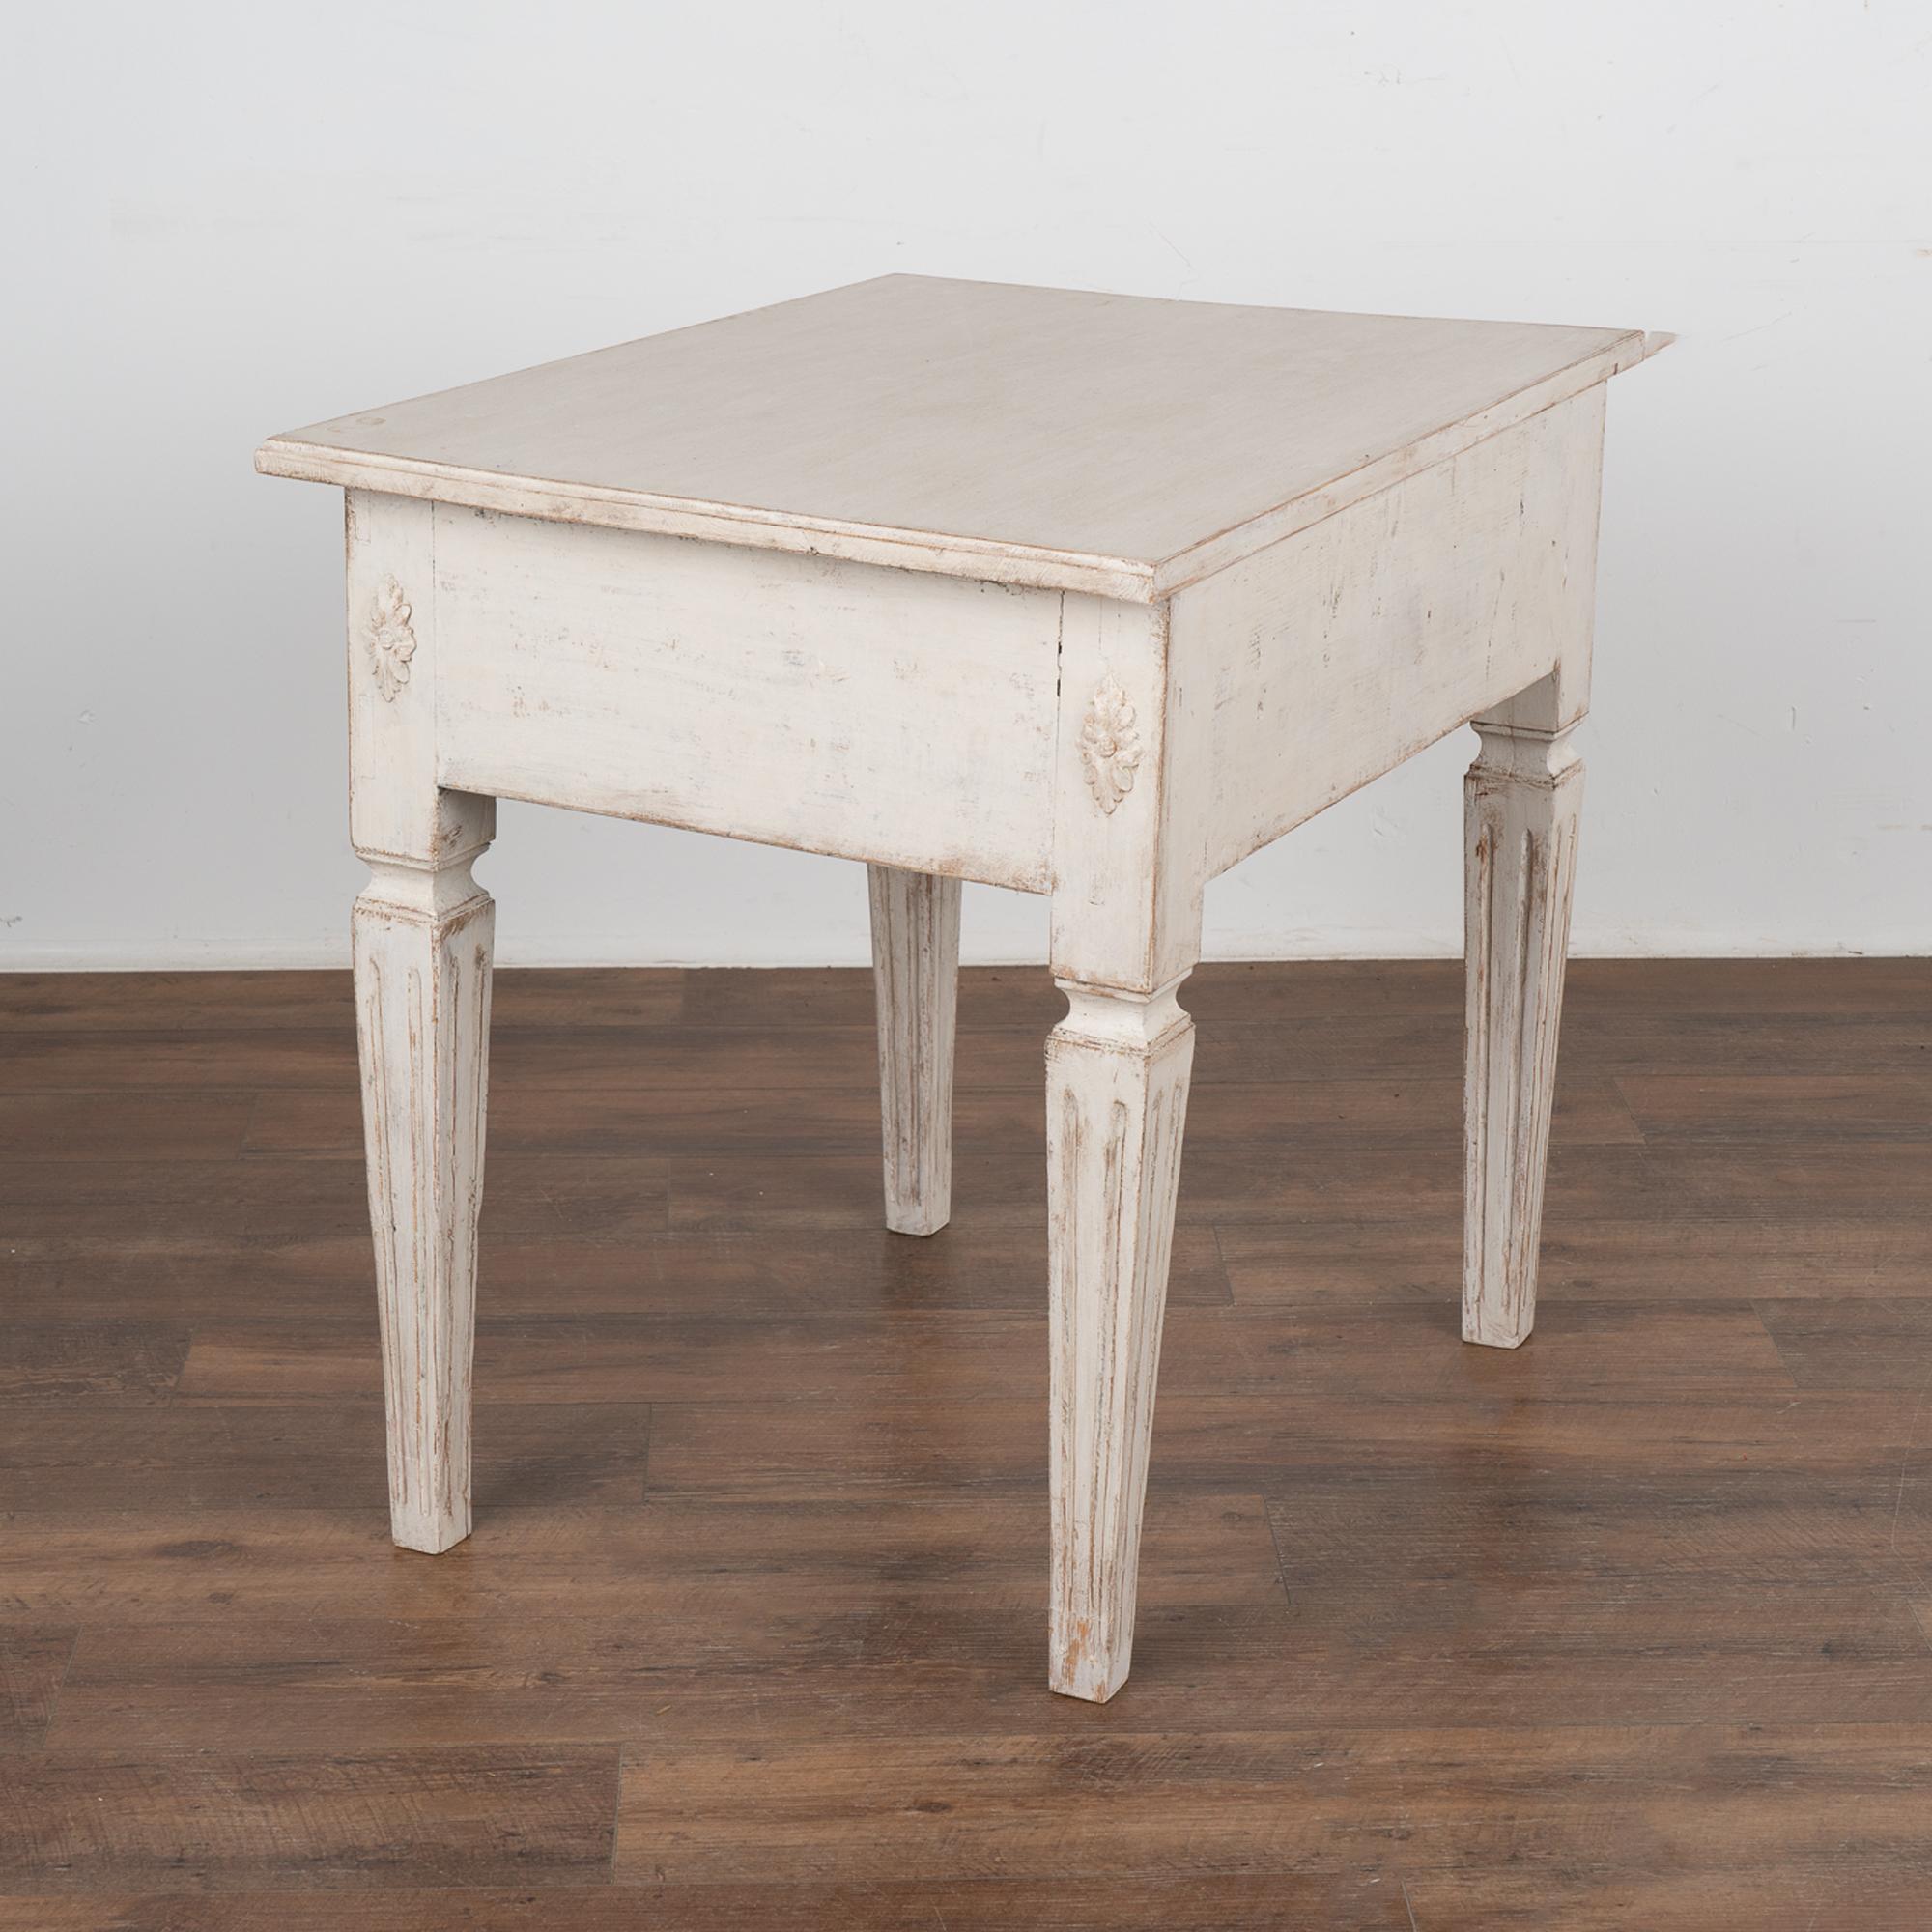 Antique Swedish Gustavian White Painted Side Table With Drawer, circa 1840-60 For Sale 3